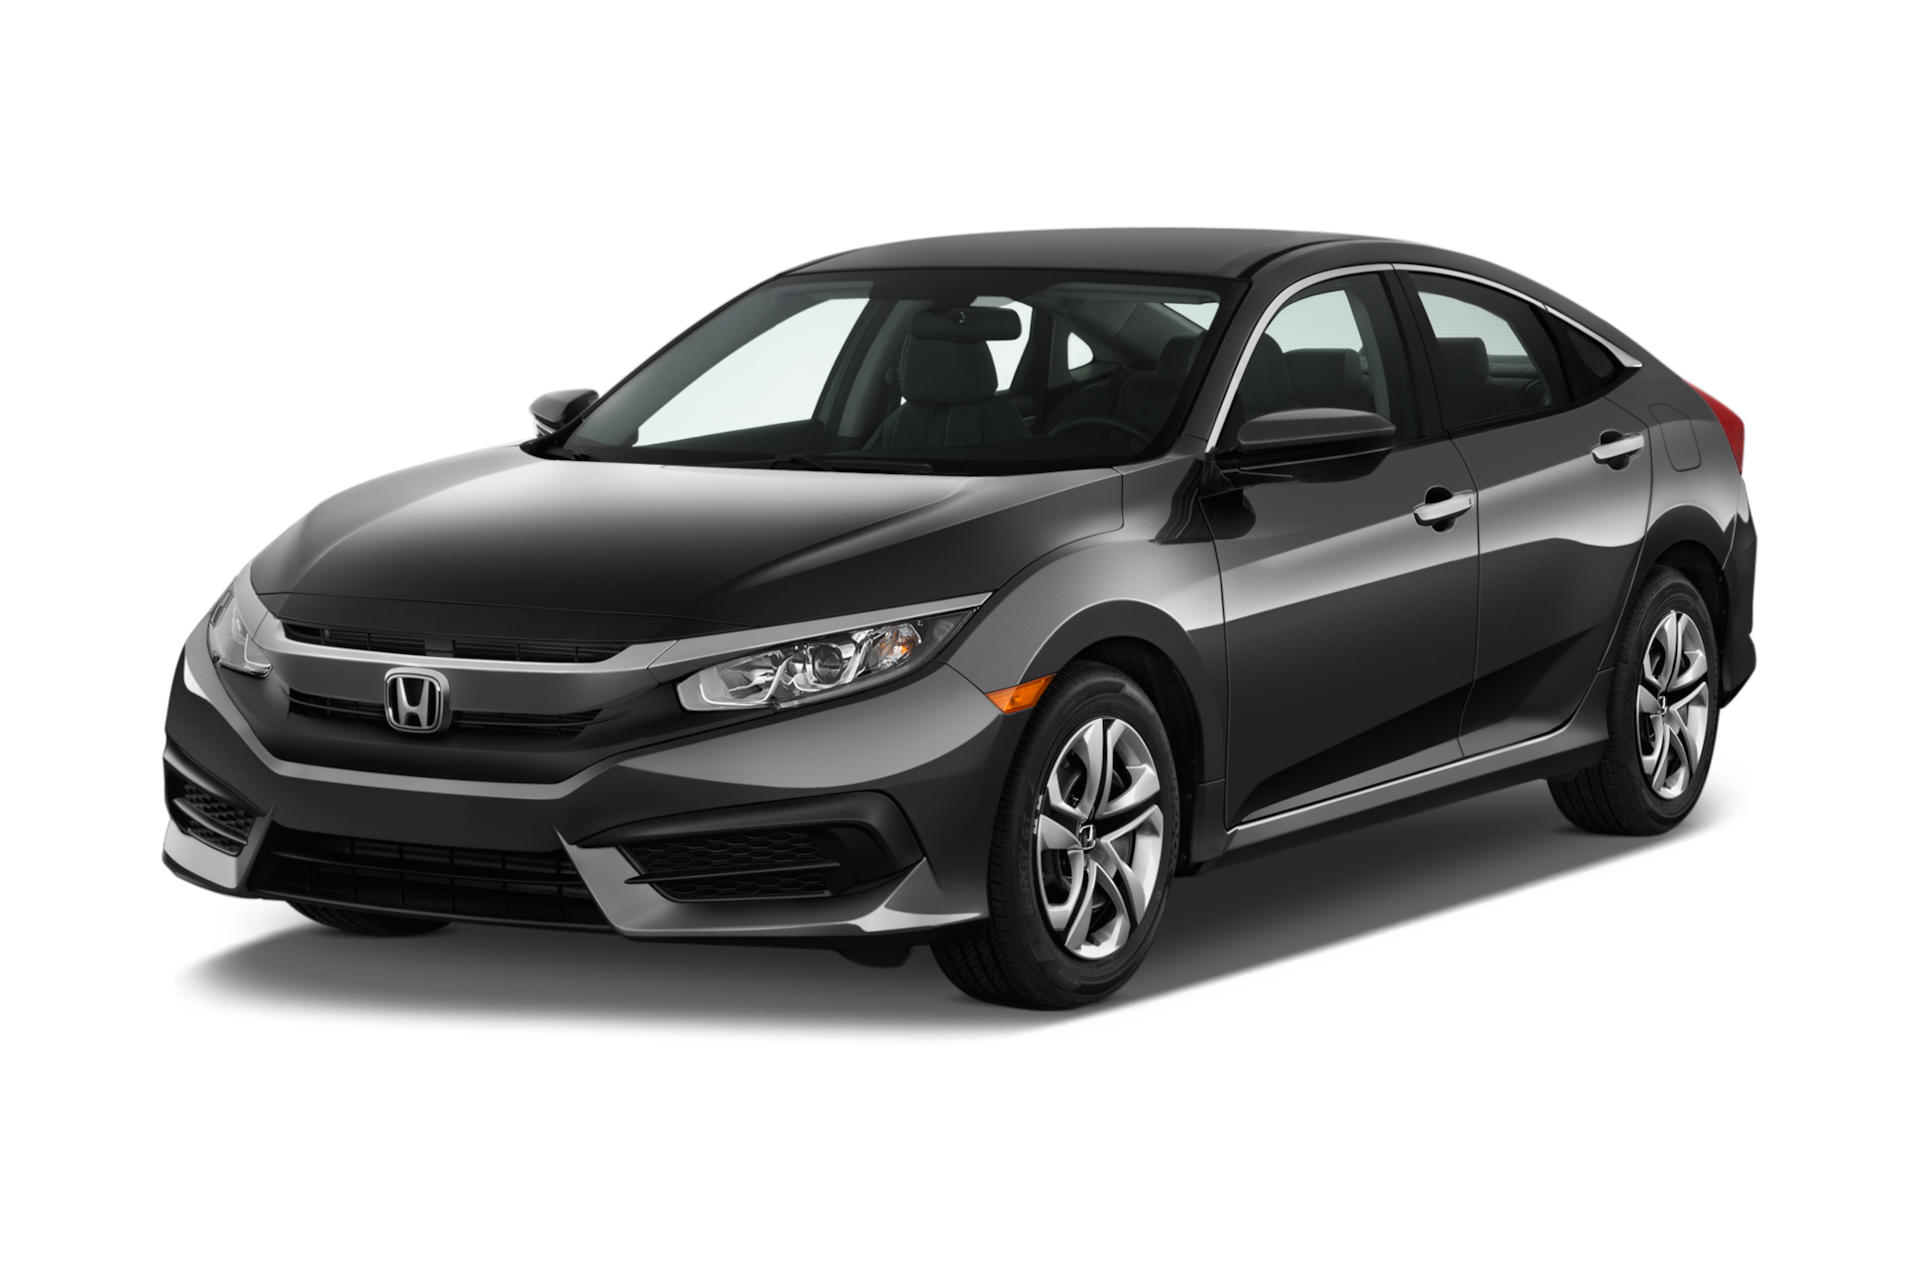 2016 Honda Civic Prices, Reviews, and Photos - MotorTrend